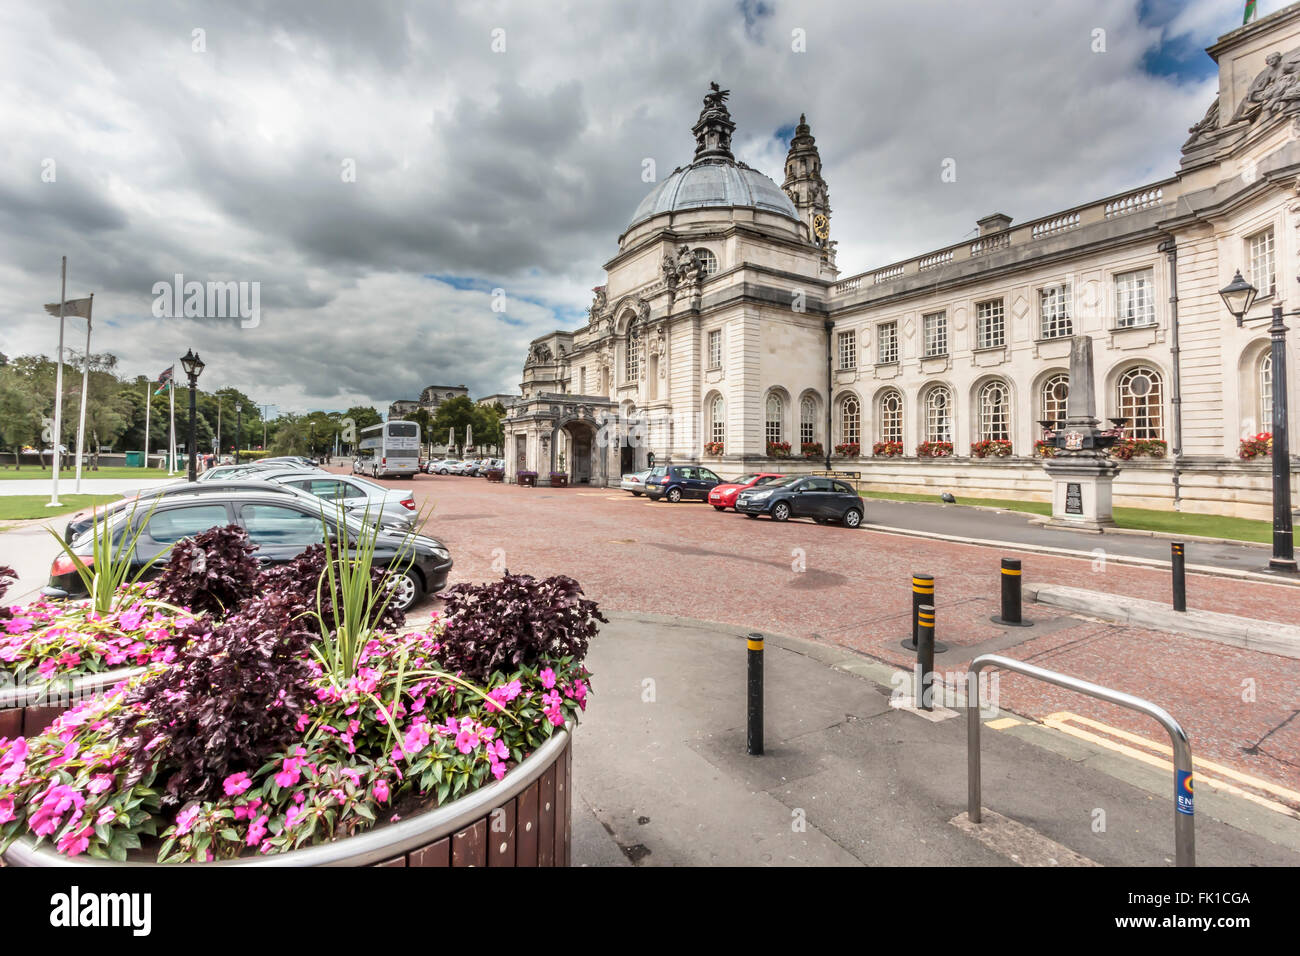 Cardiff City town hall civic center glamorgan GALLES Foto Stock